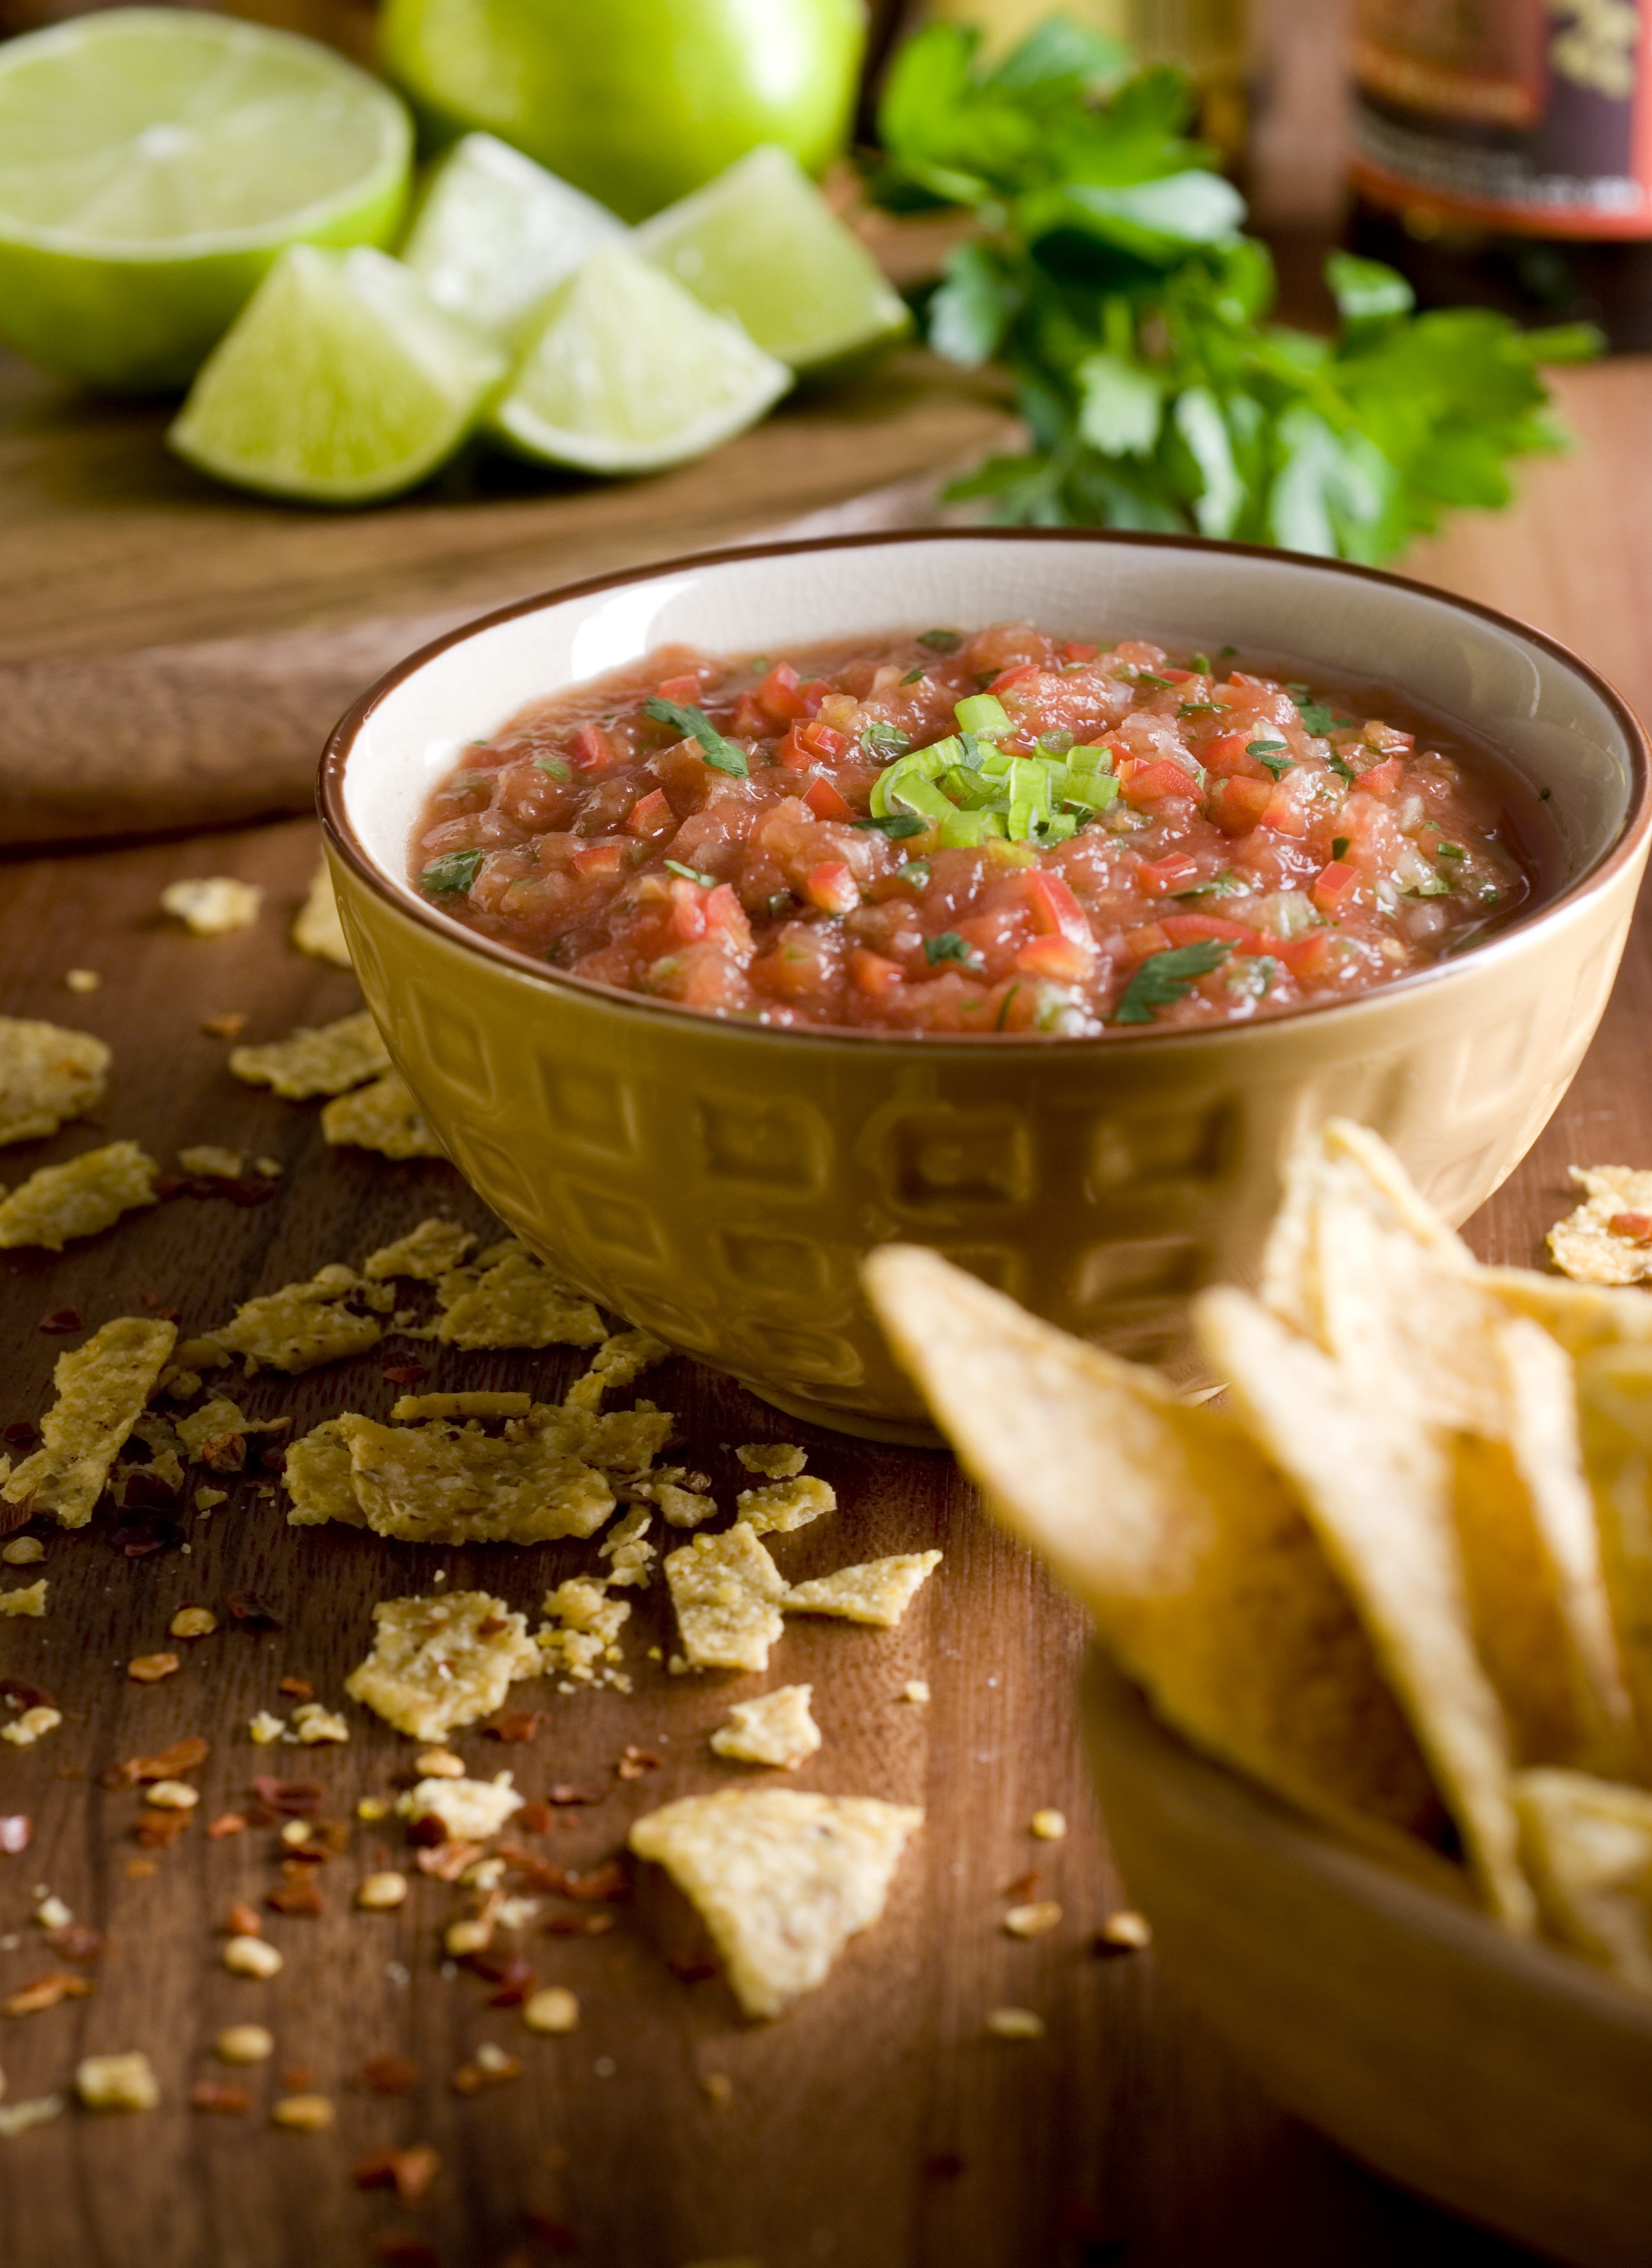 salsa and corn chips in a rustic setting.